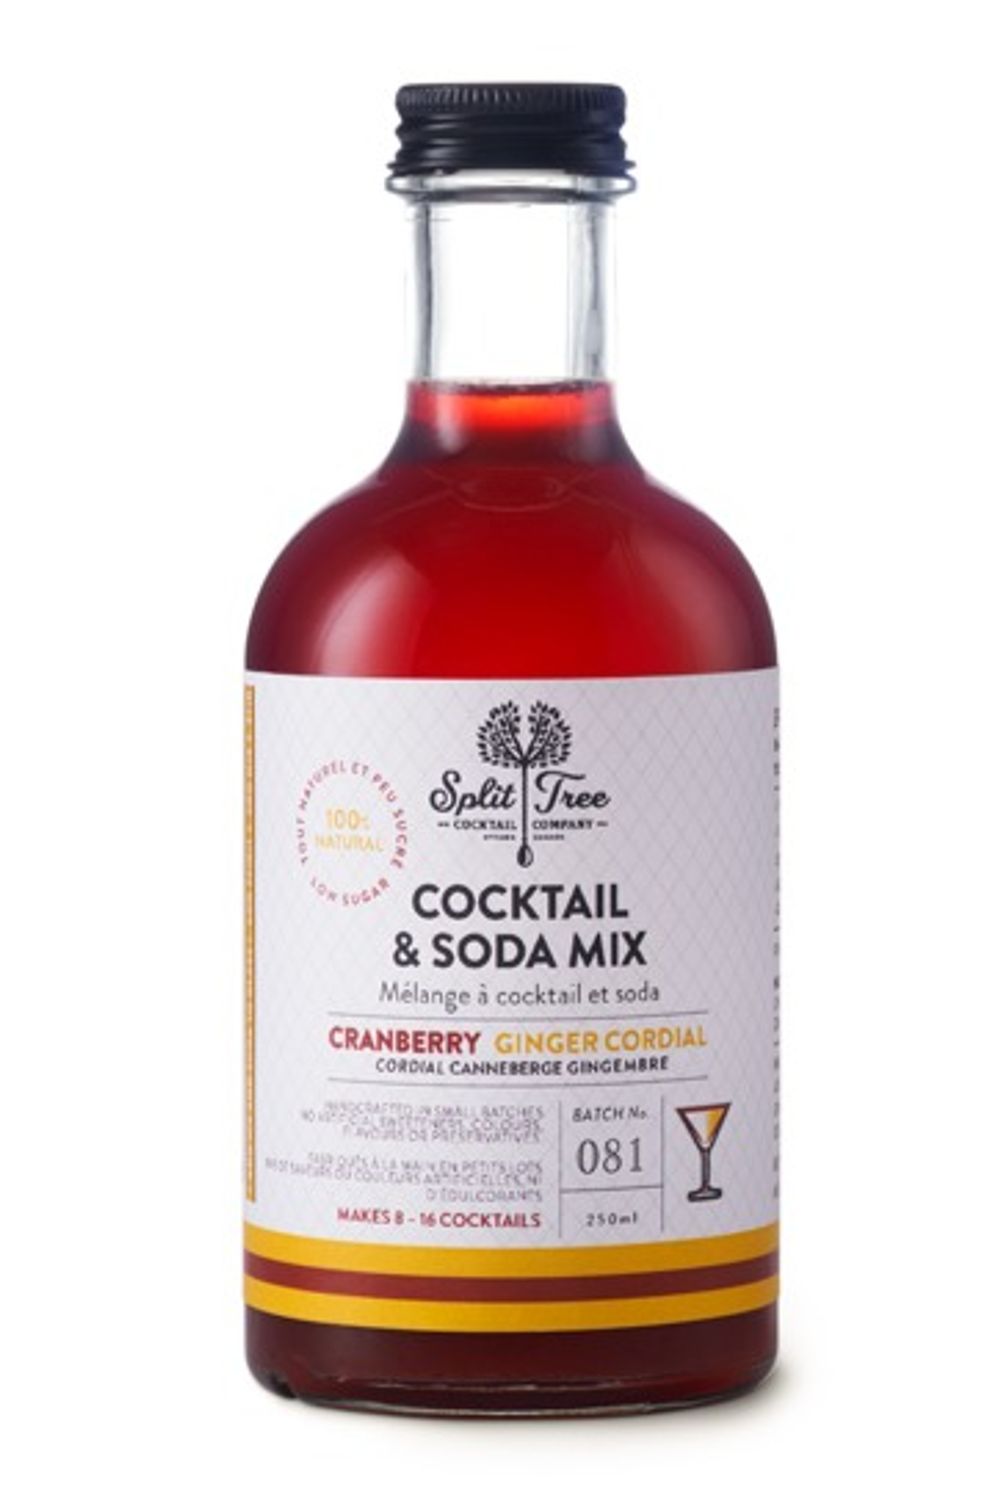 Cranberry Ginger Cordial